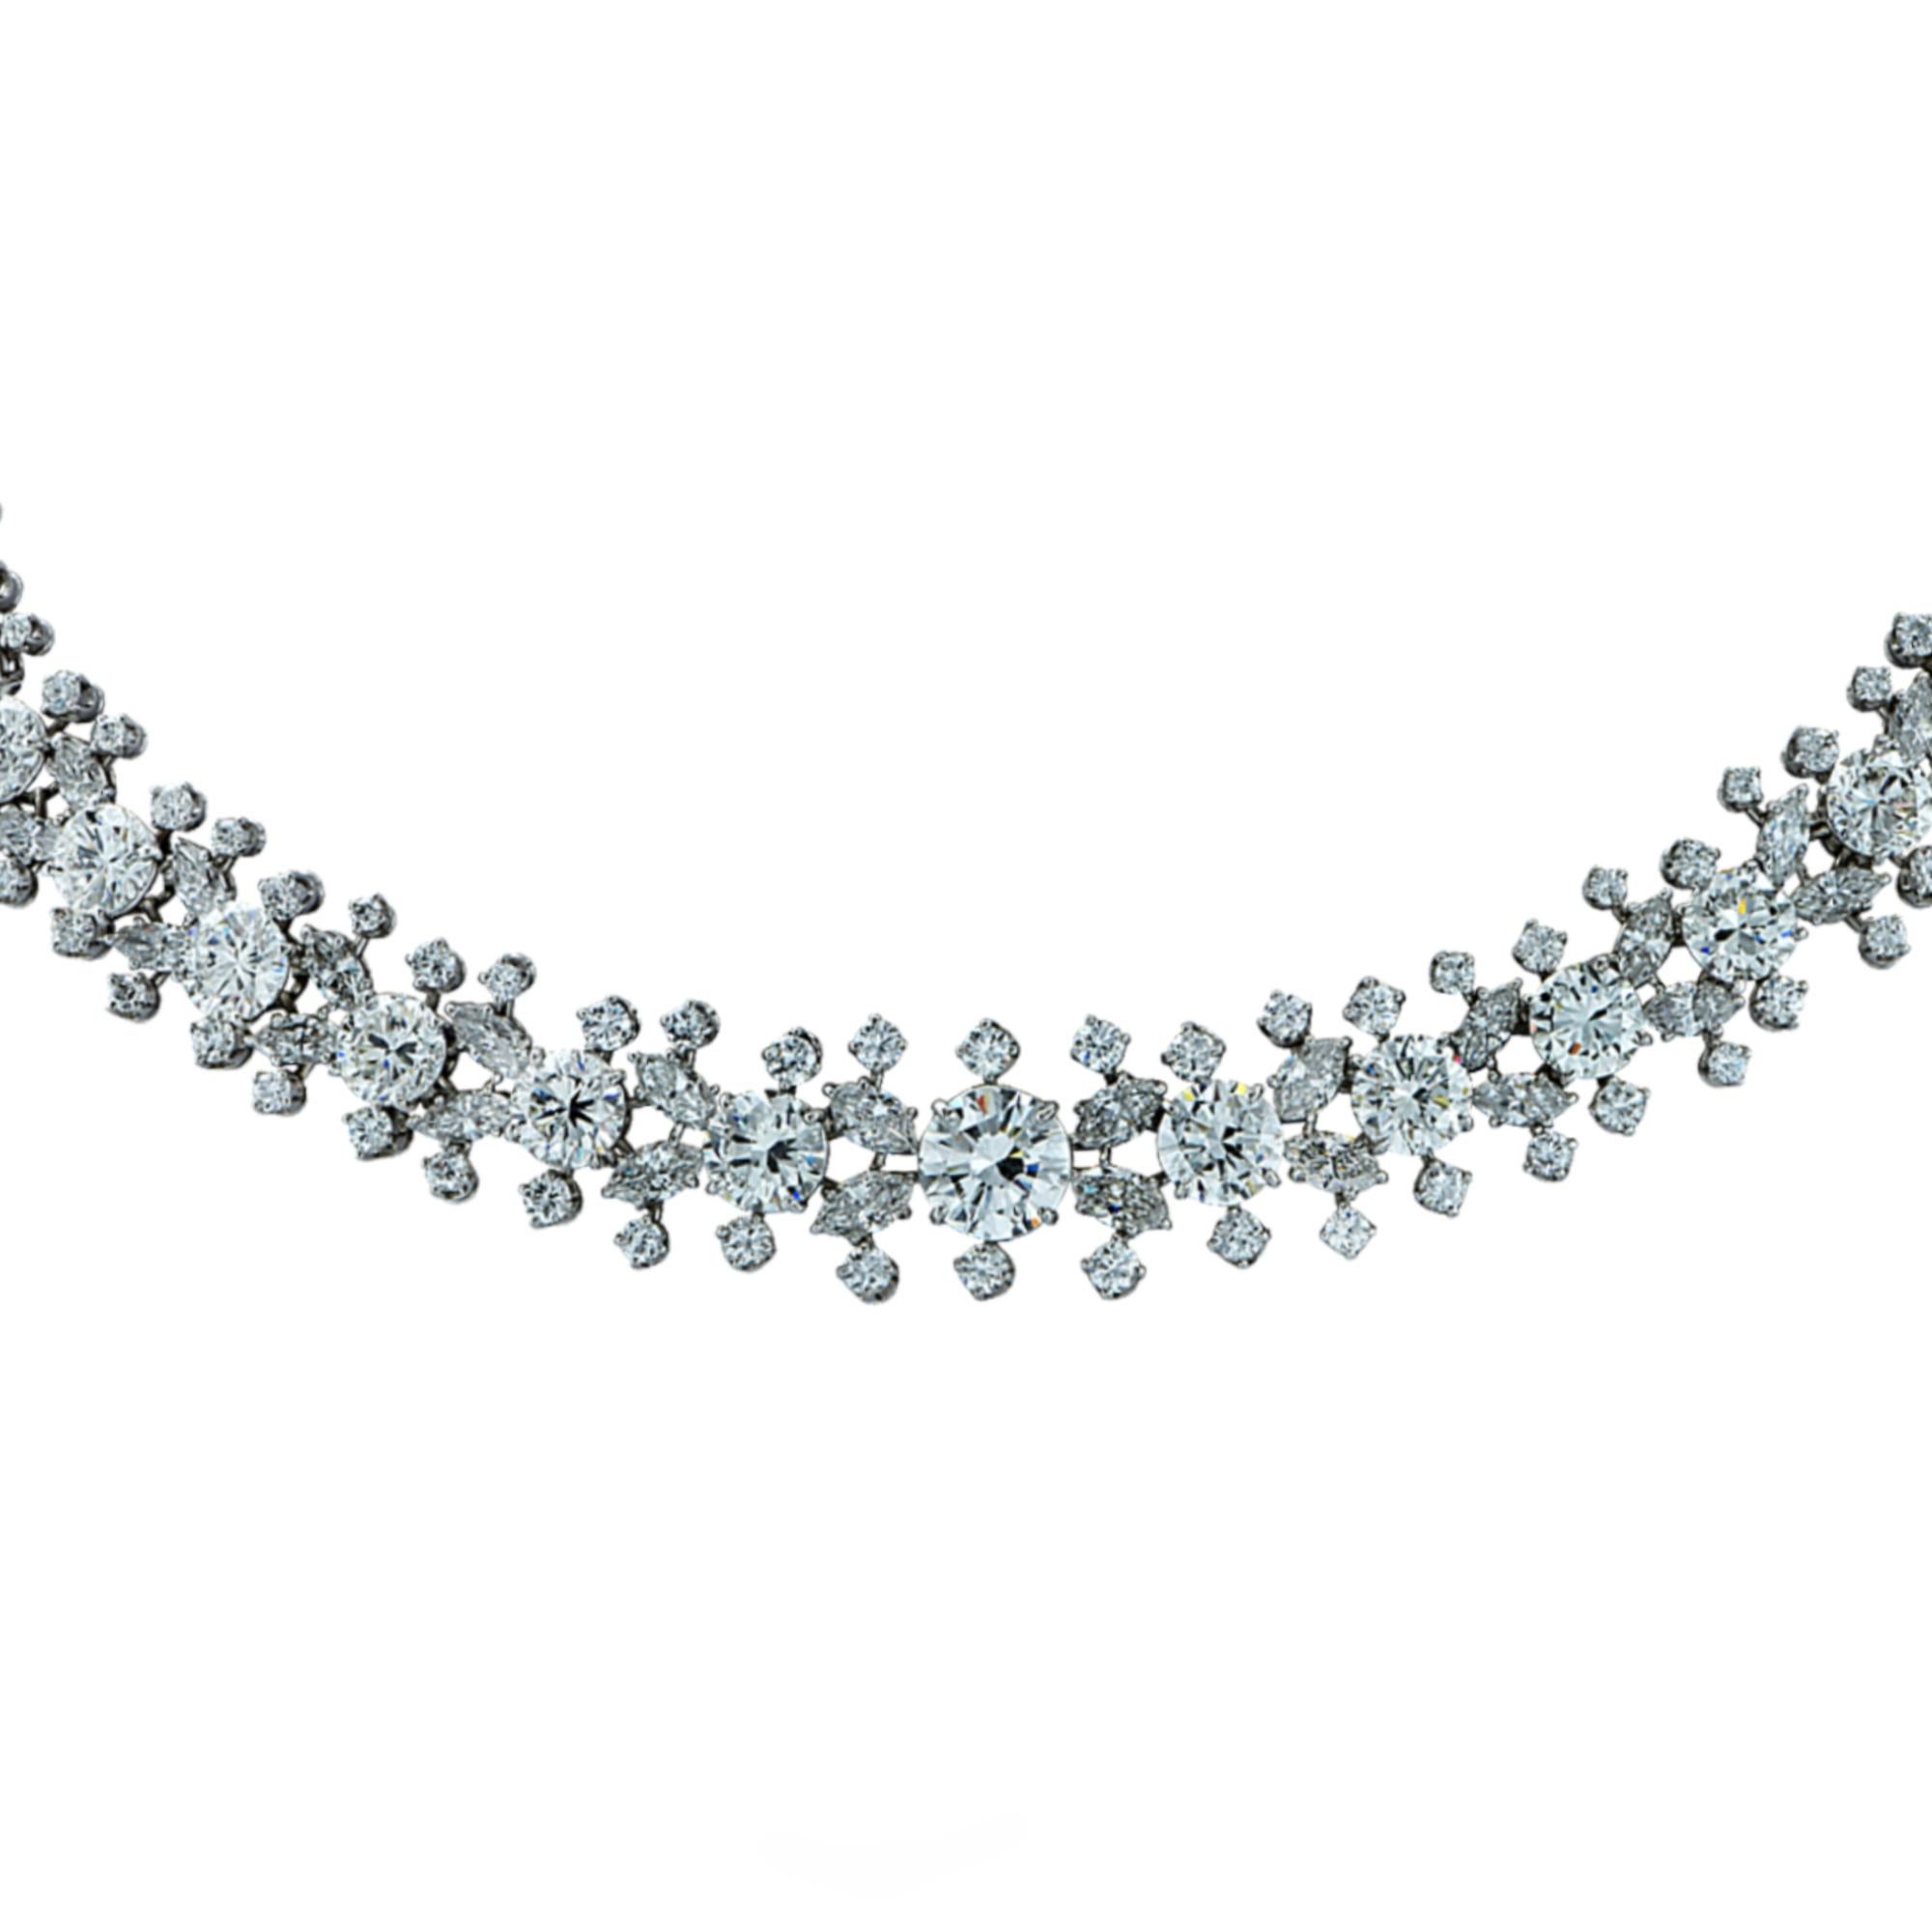 From the legendary house of Harry Winston, this exquisite necklace, expertly crafted in fine platinum by the renowned French jeweler, Francois Tavernier, showcases 52 carats total weight of collection diamonds set in a stunning floral design. This